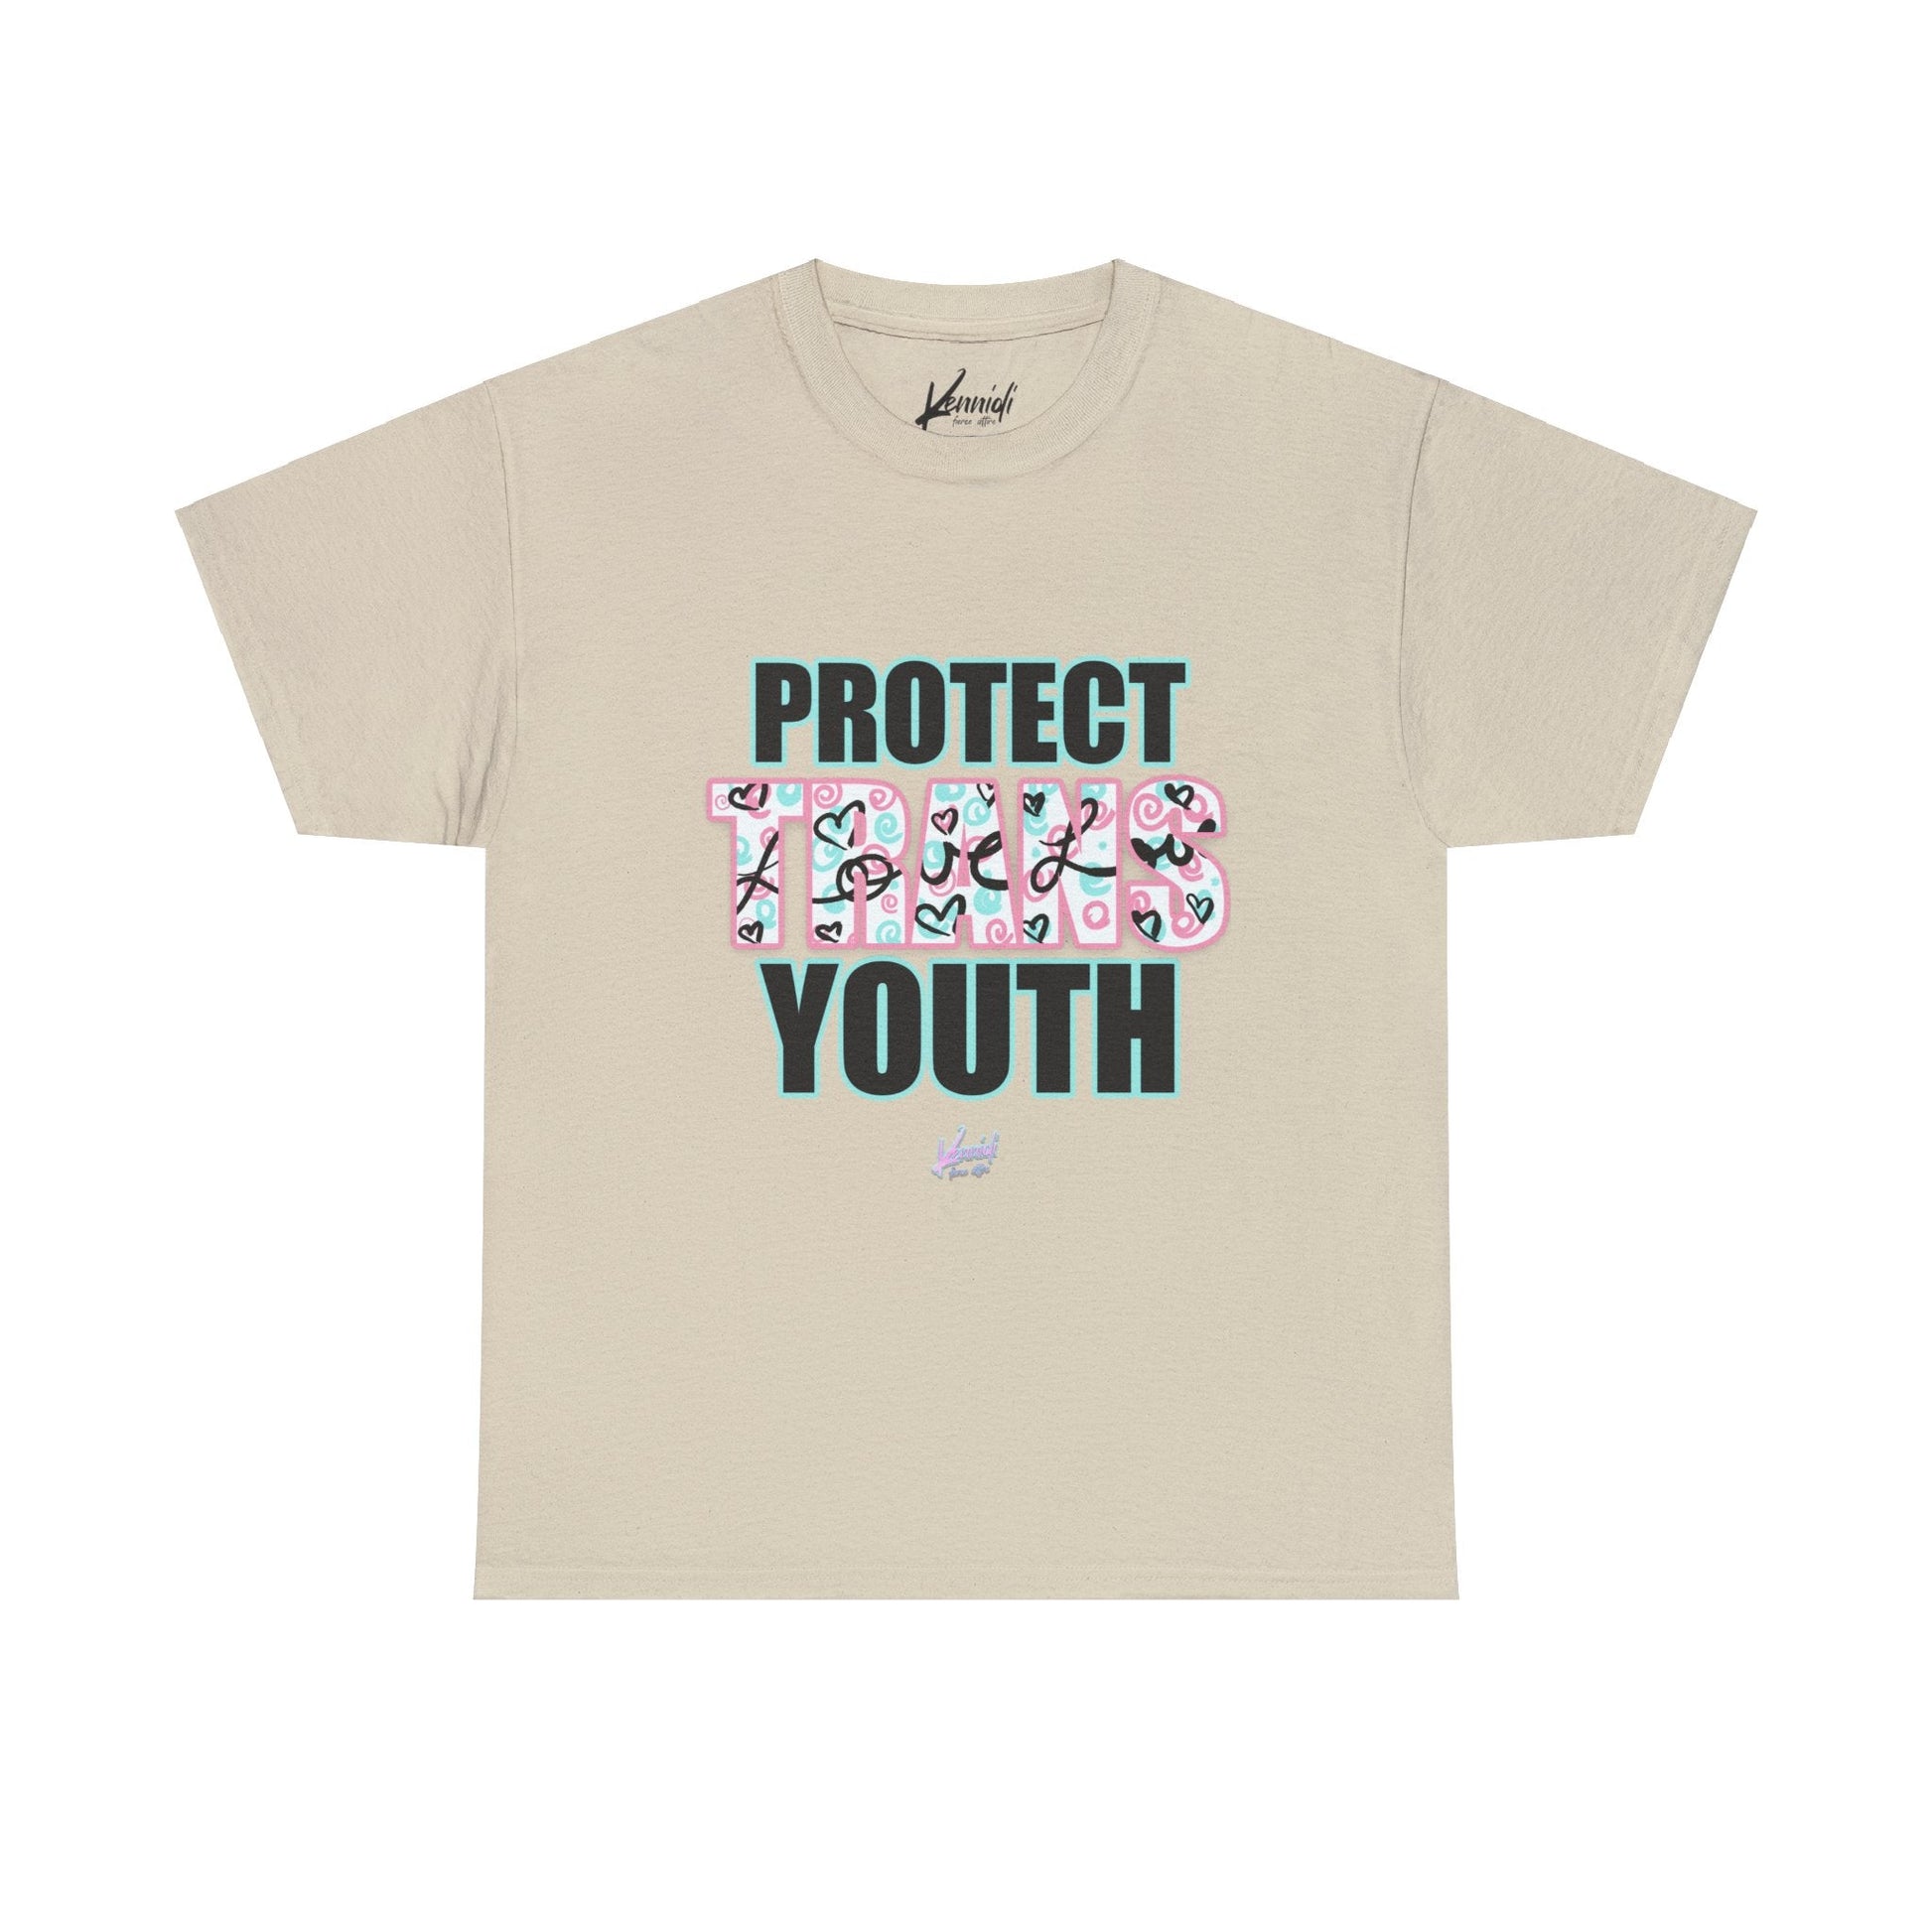 Protect Trans Youth Love 3.0 Unisex Heavy Cotton Tee - T - Shirt